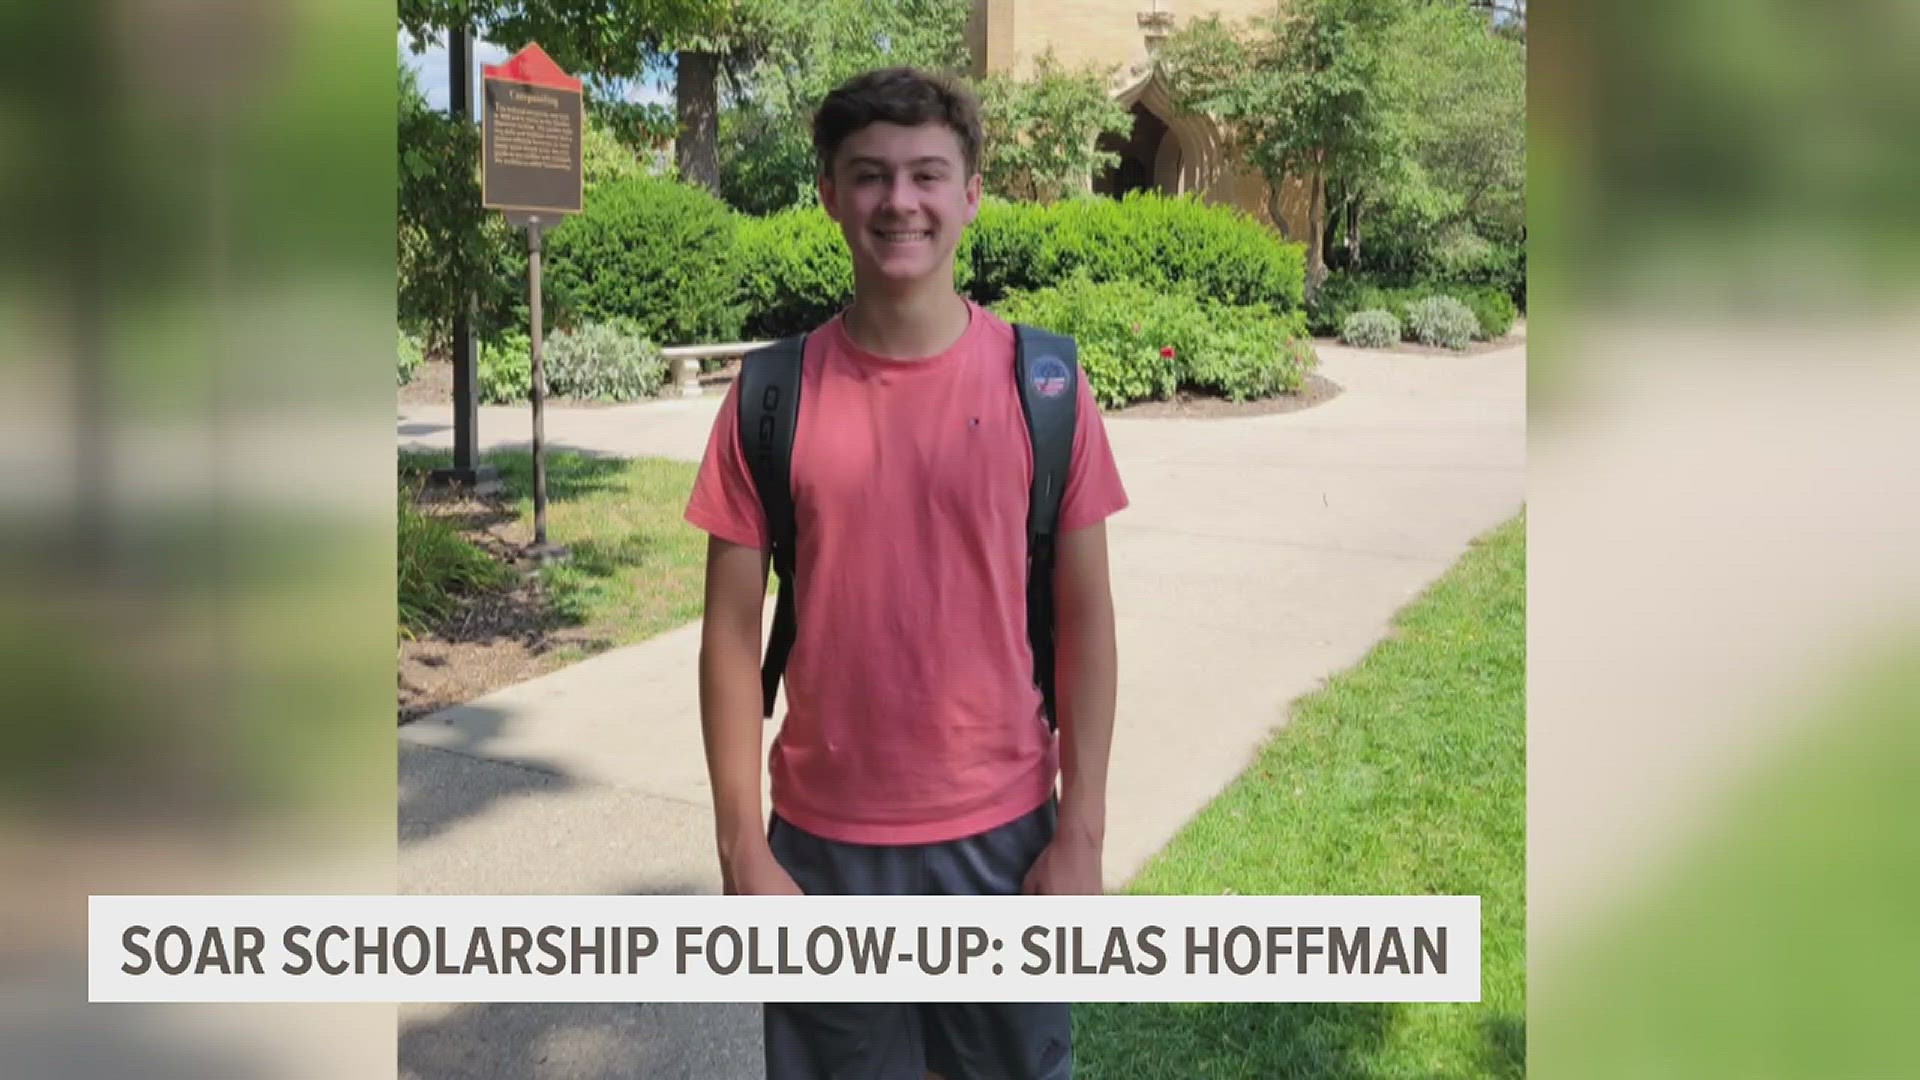 Silas Hoffman of Muscatine won in 2022 through his creativity in helping people with disabilities through technology and supporting mental health awareness.